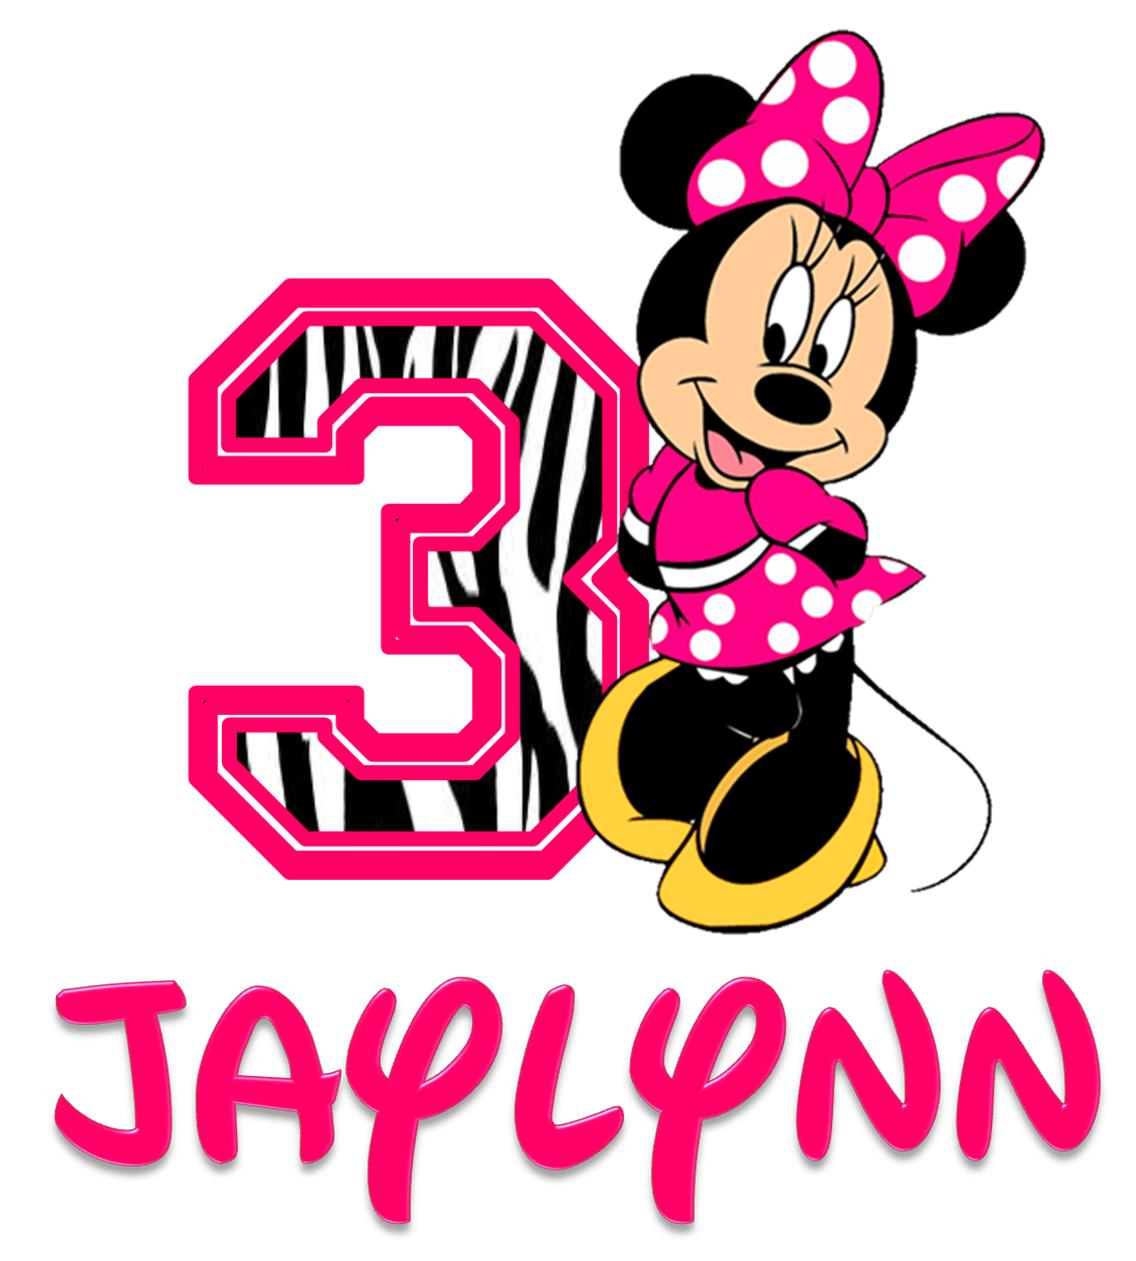 Animal Print Minnie Mouse Clipart   Cliparthut   Free Clipart